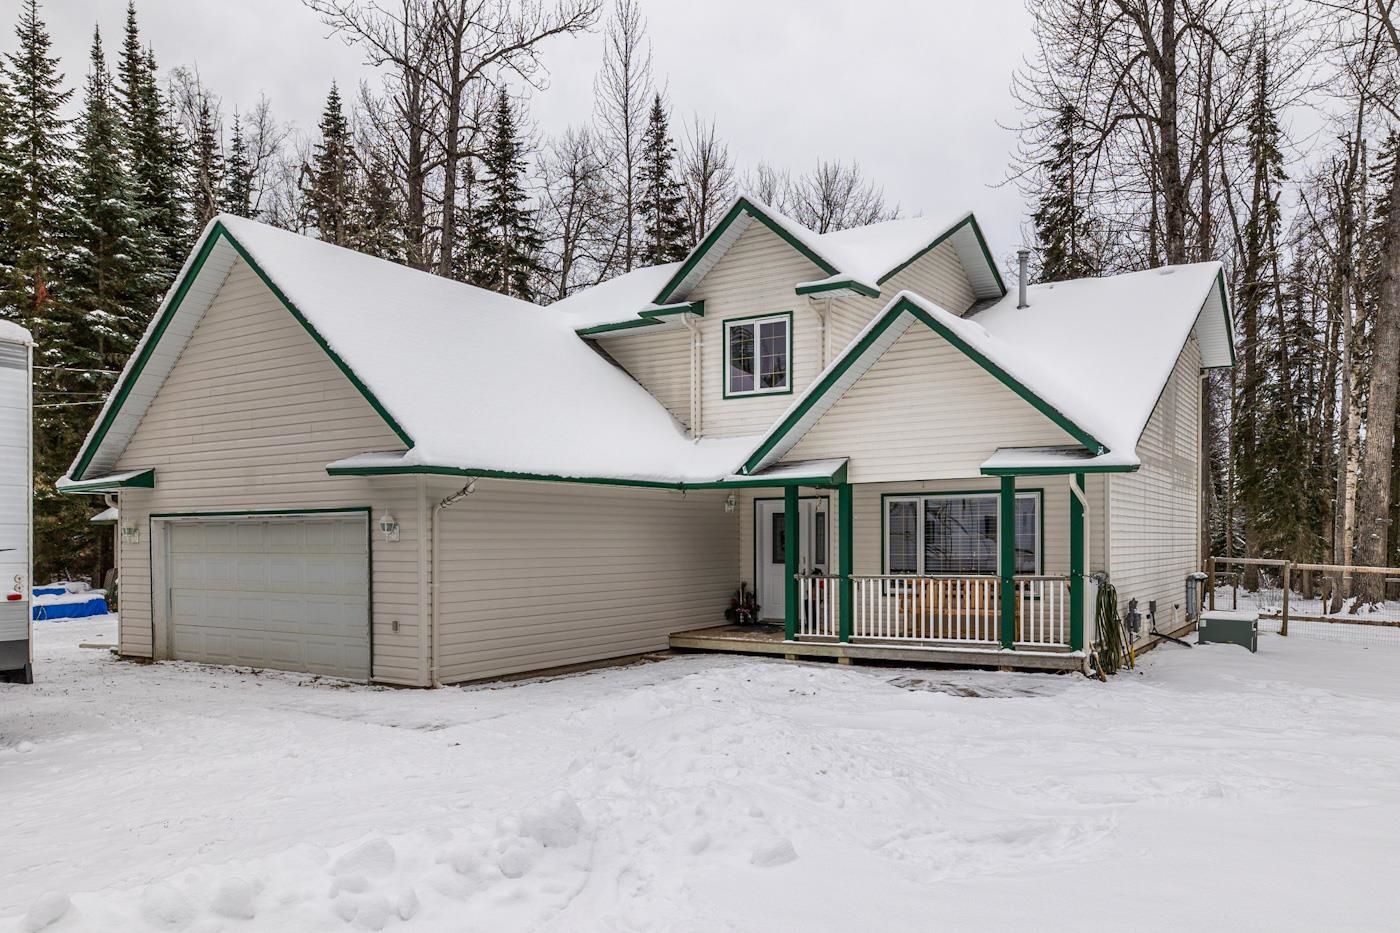 Main Photo: 9105 TABOR GLEN Drive in Prince George: Tabor Lake House for sale (PG Rural East (Zone 80))  : MLS®# R2638989